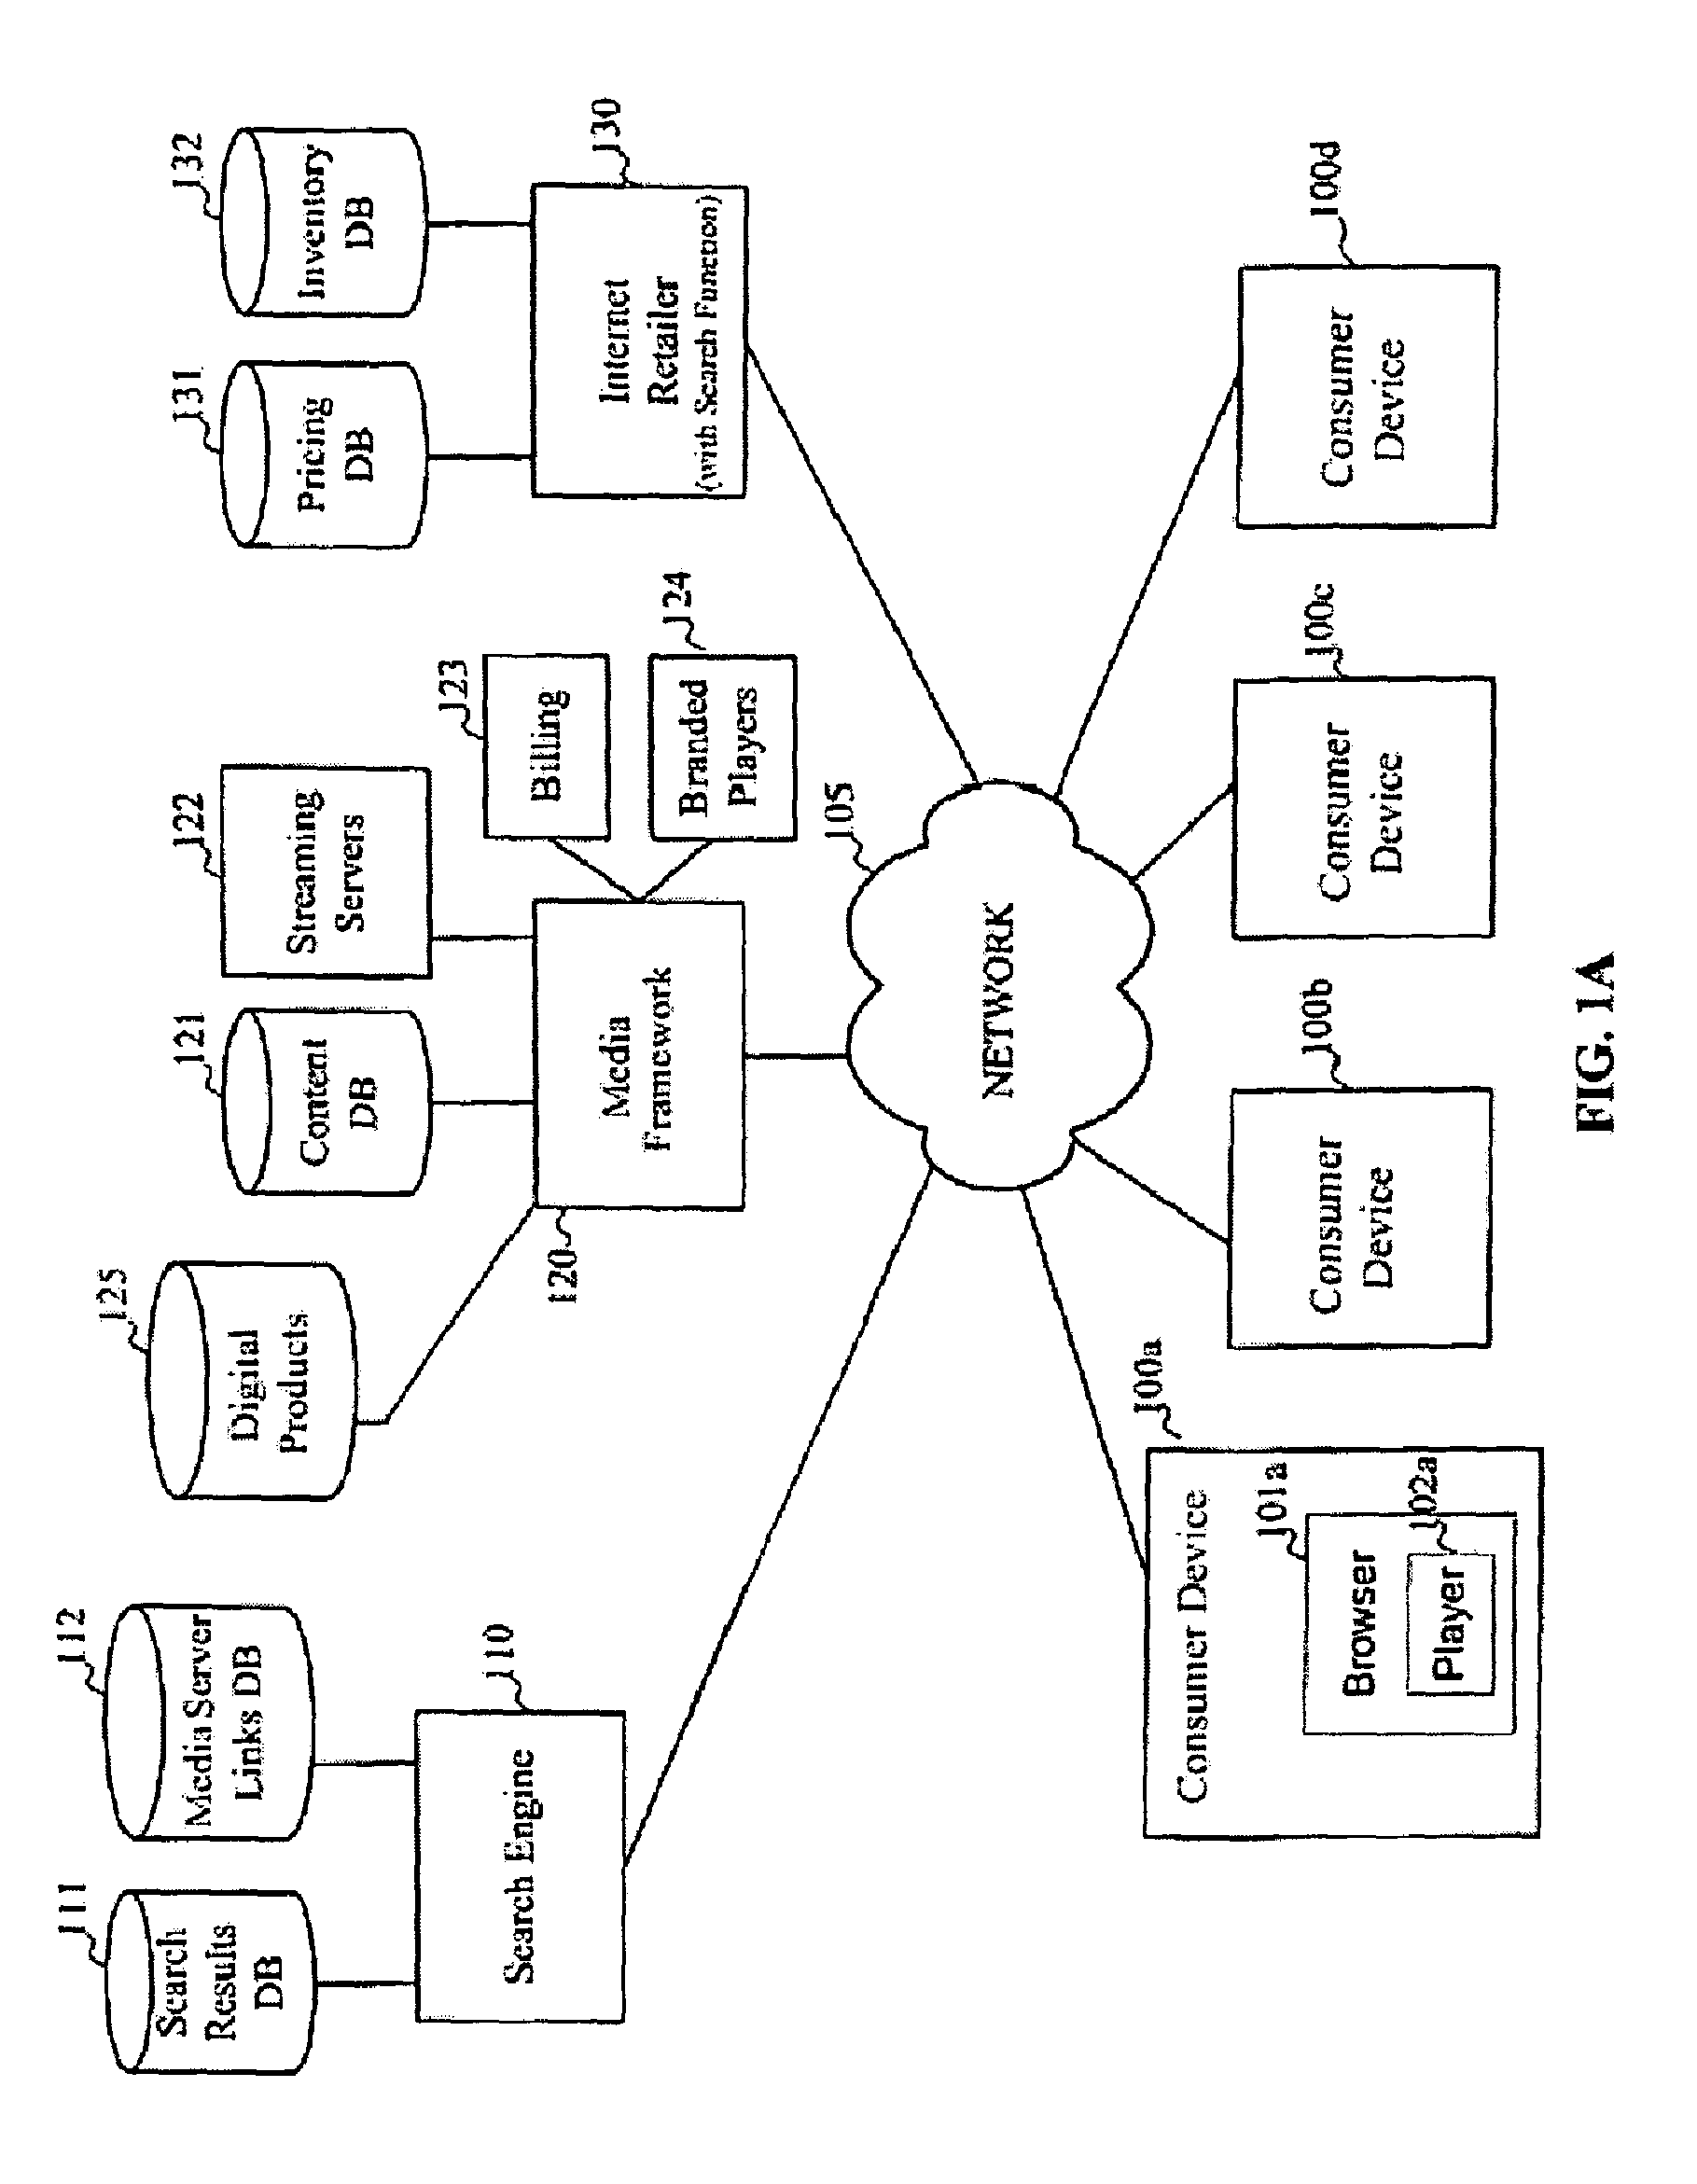 System and method for providing media samples on-line in response to media related searches on the internet